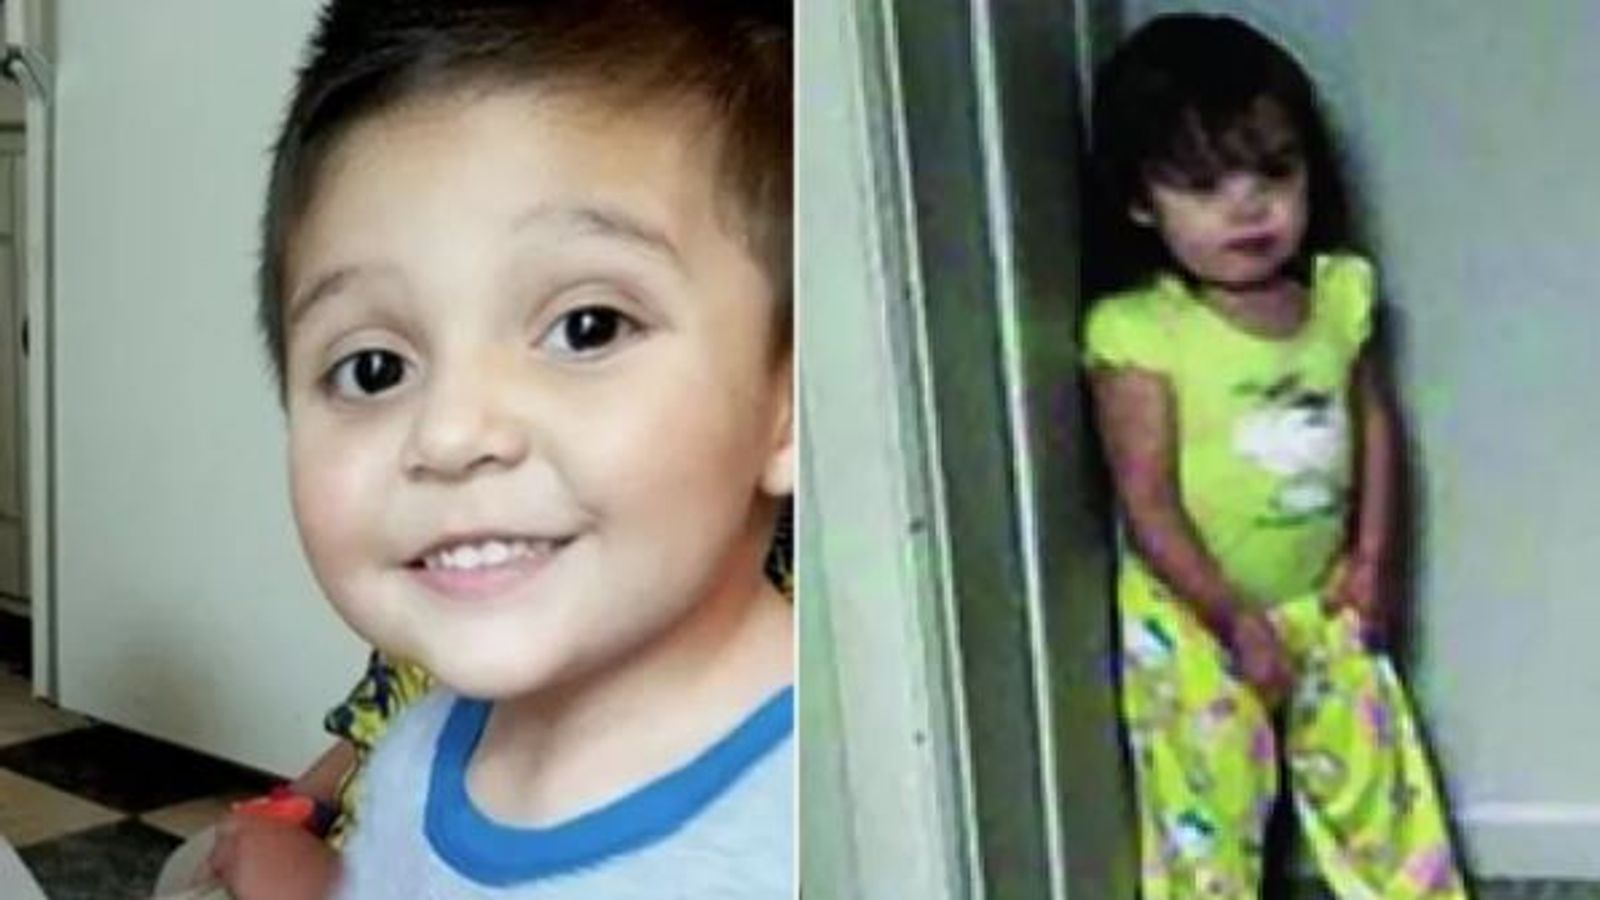 Child's body found encased in concrete as police search for two kids missing since 2018